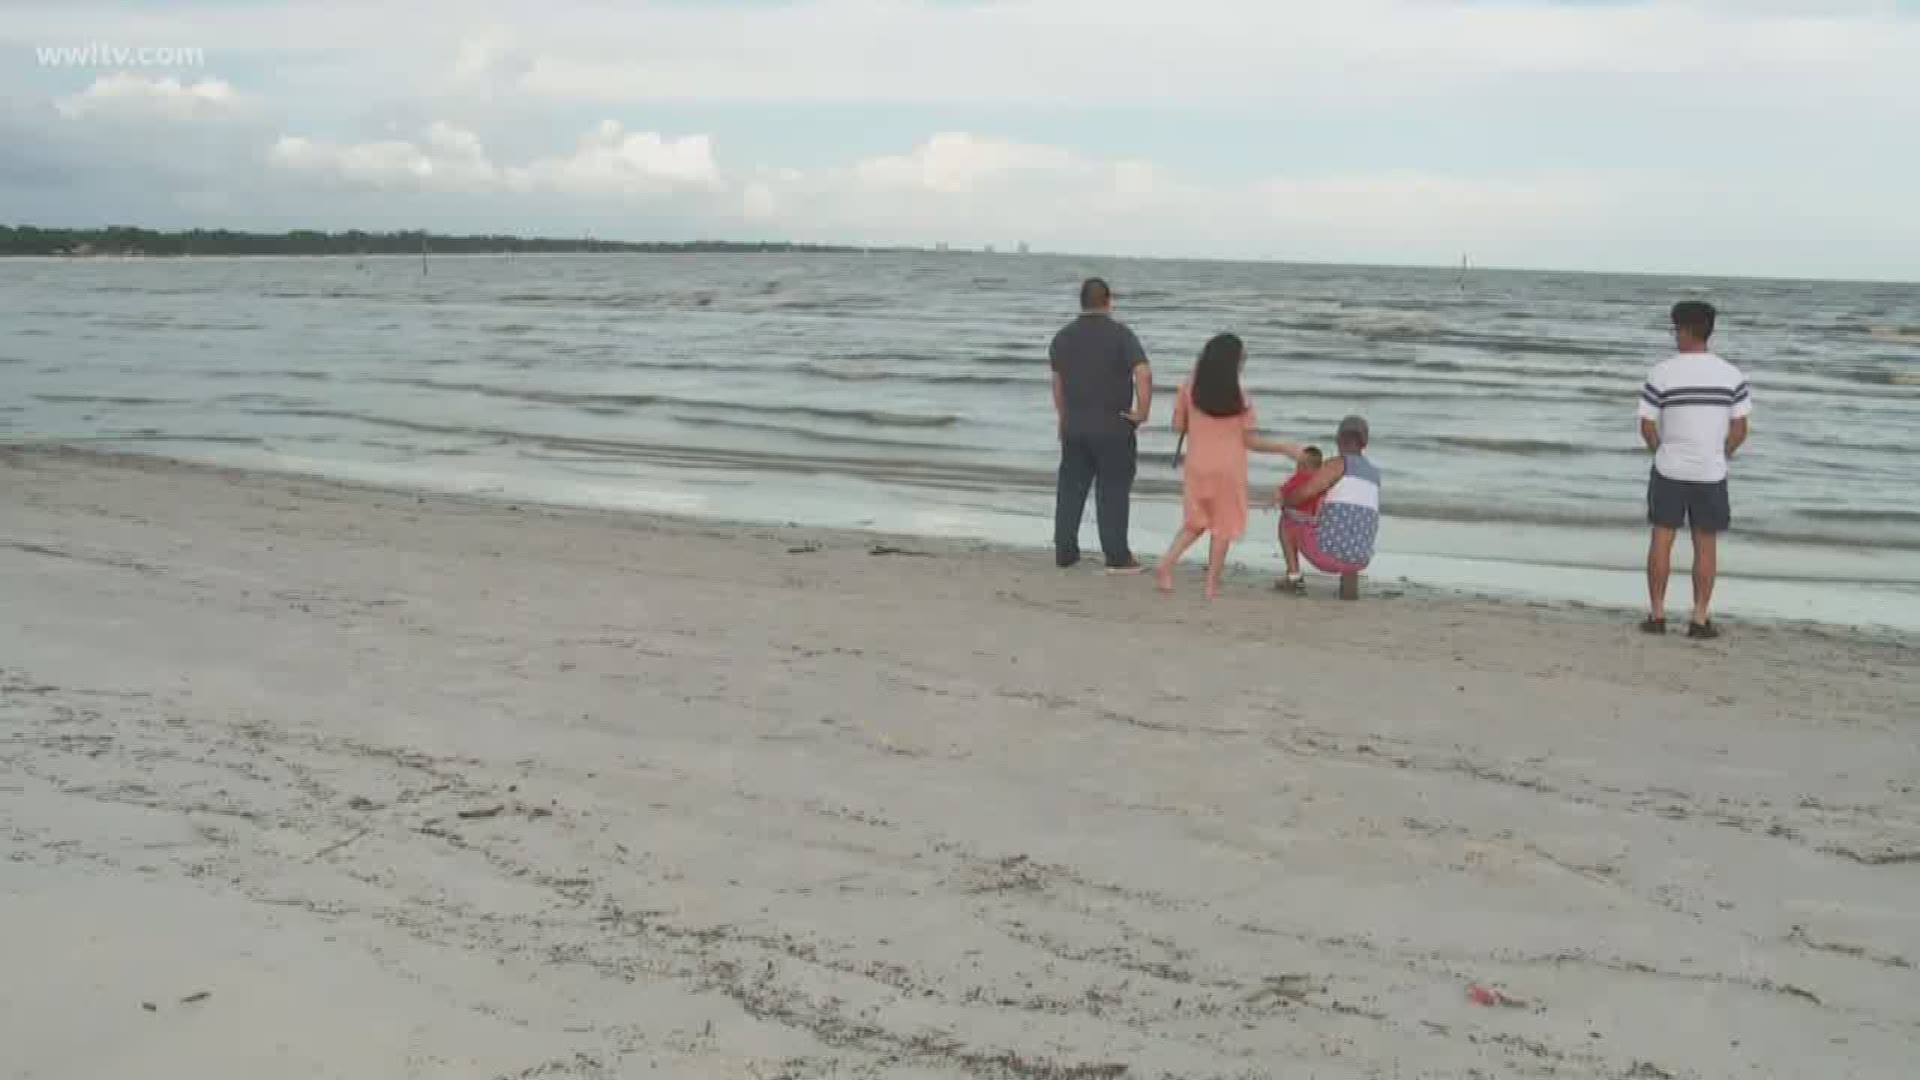 WWL-TV reporter Jacqueline Quynh reports from the Mississippi coast ahead of Tropical Storm Gordon